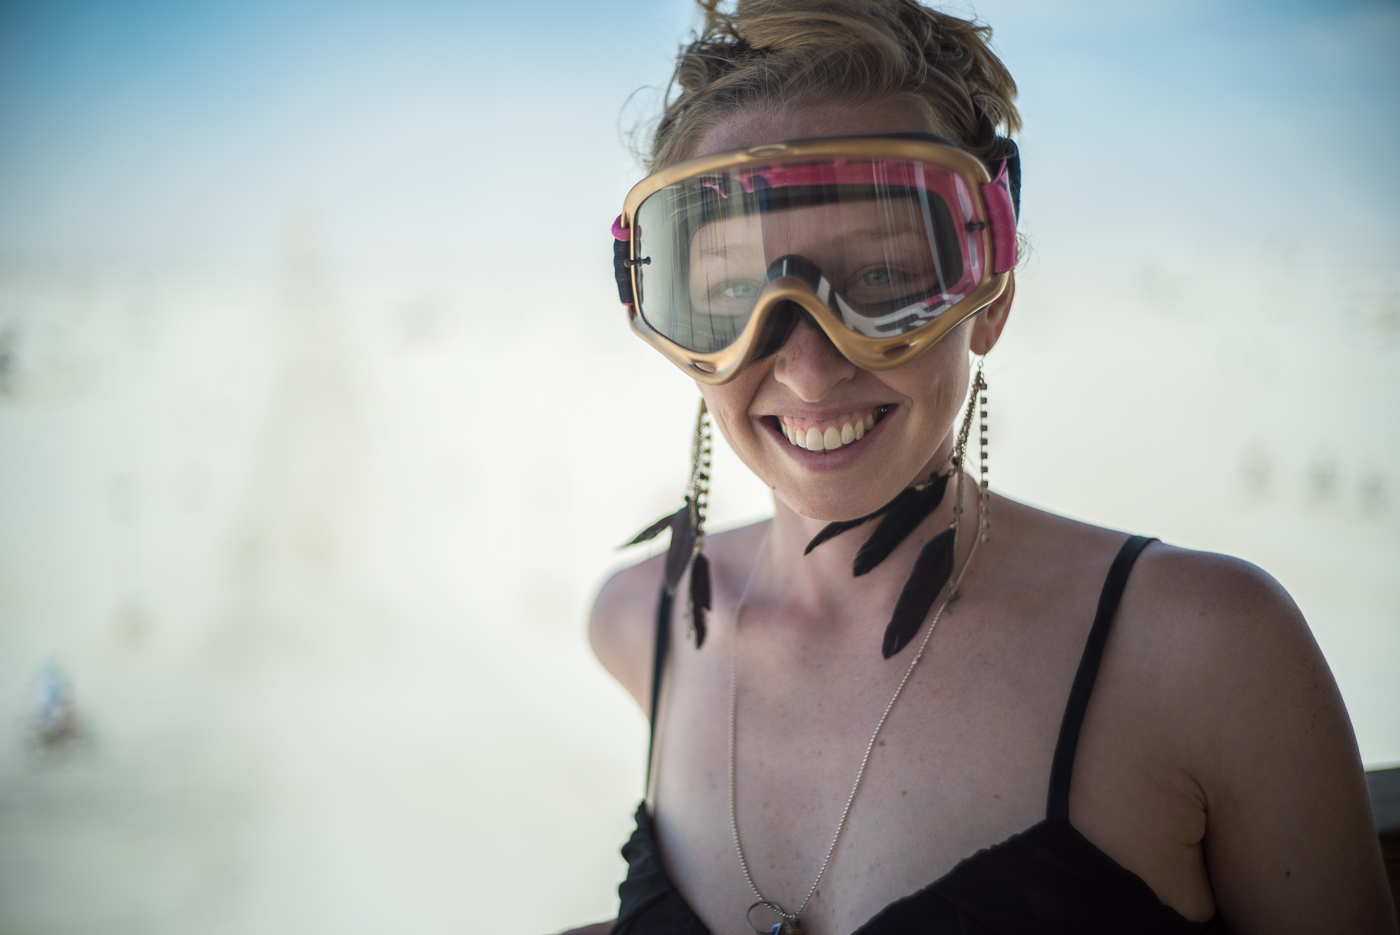 Girl in the Dust, Burning Man 2014: In Dust We Trust - Photos of a Dusty Playa